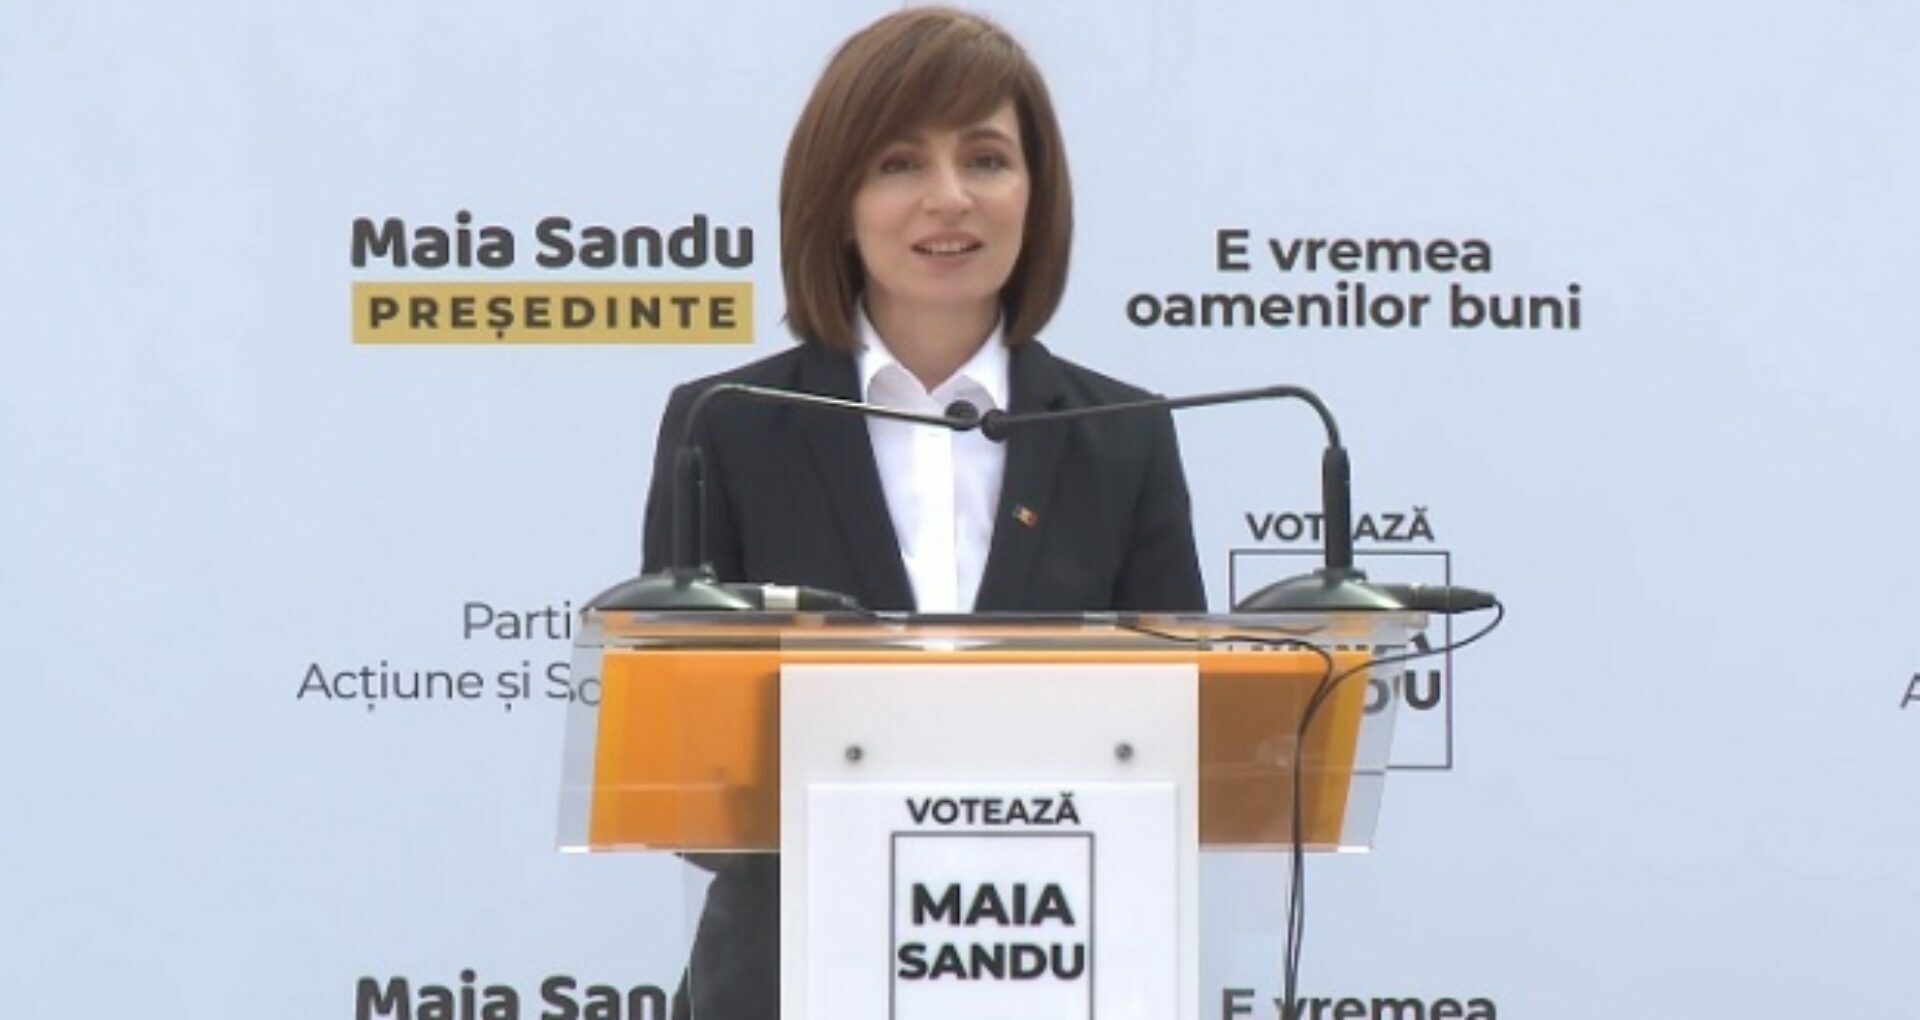 The Constitutional Court Validated Maia Sandu’s Mandate as President